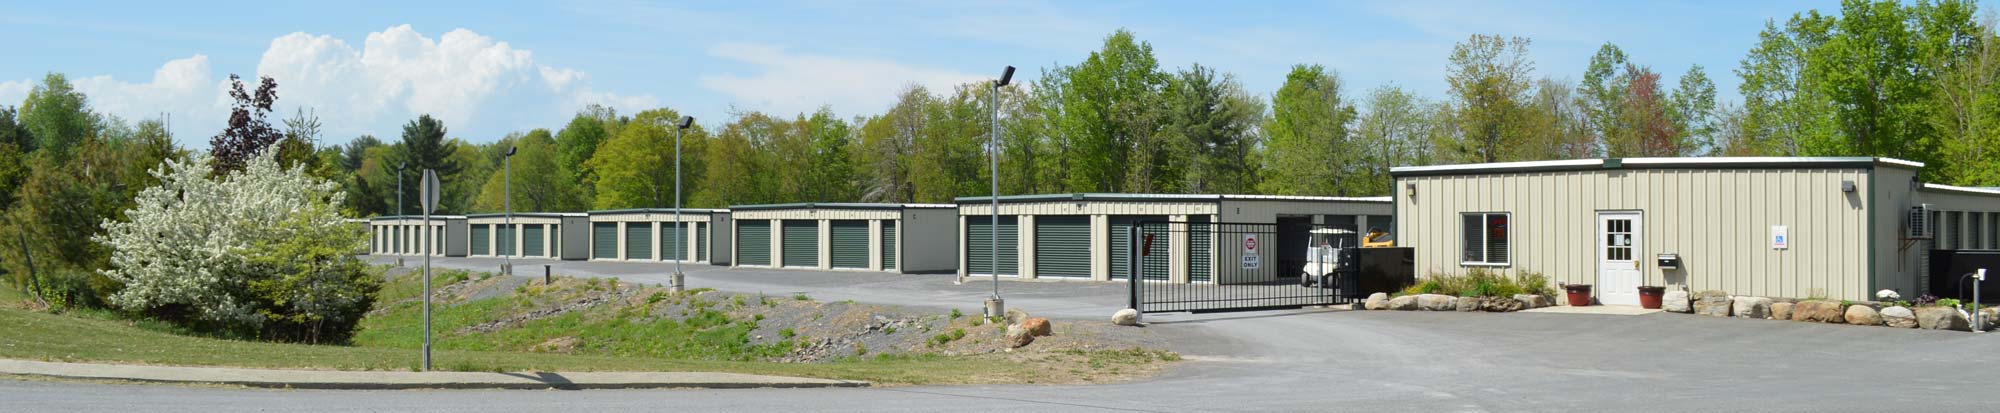 self storage units in new lebanon, craryville, and hudson ny